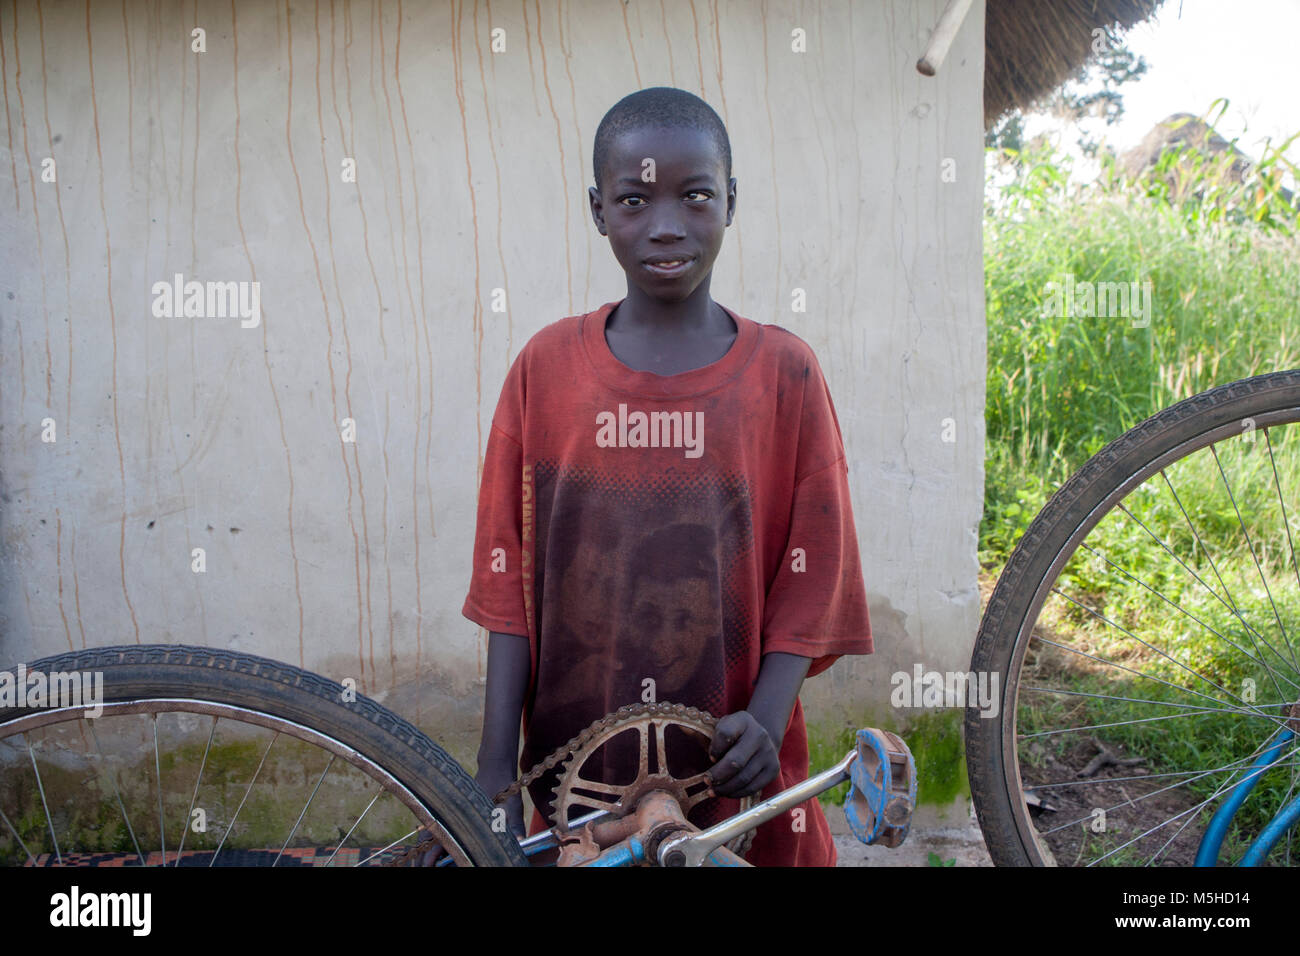 Boy from the village of Kedougou in Senegal with his bicycle Stock Photo